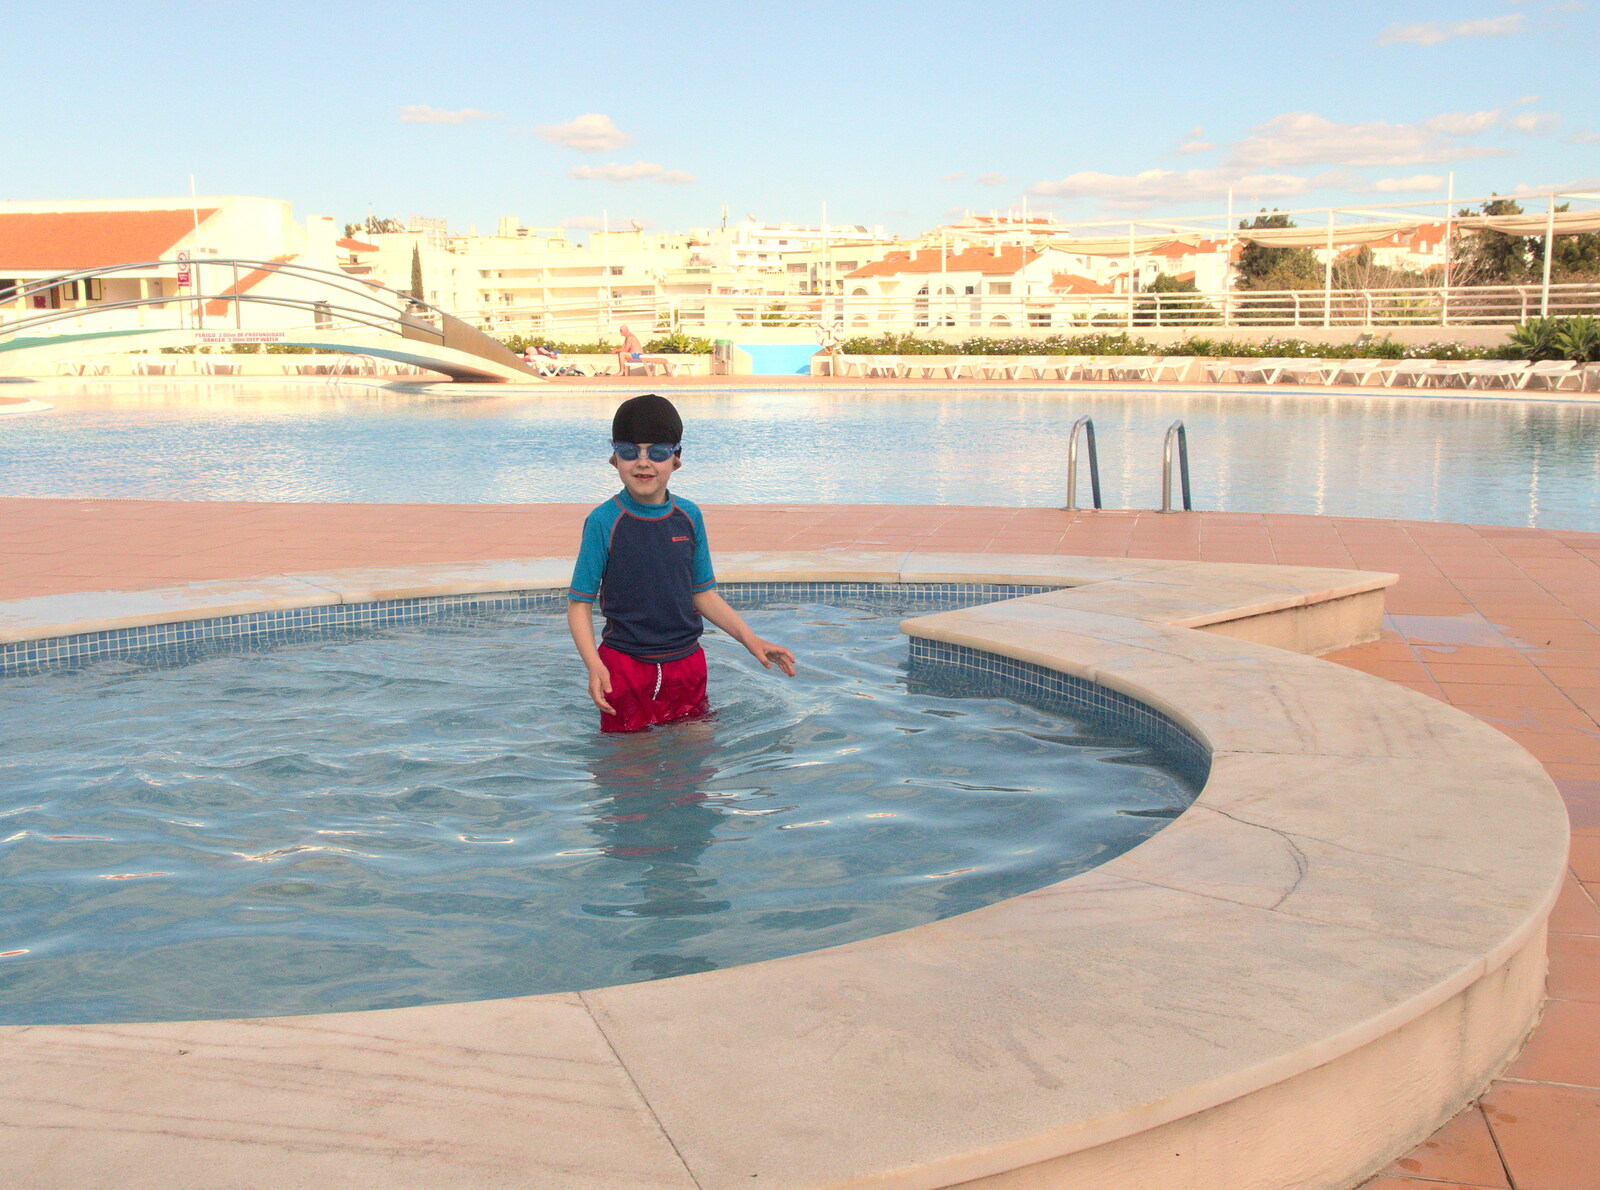 Back at the hotel, Fred goes for a swim from A Trip to Albufeira: The Hotel Paraiso, Portugal - 3rd April 2016